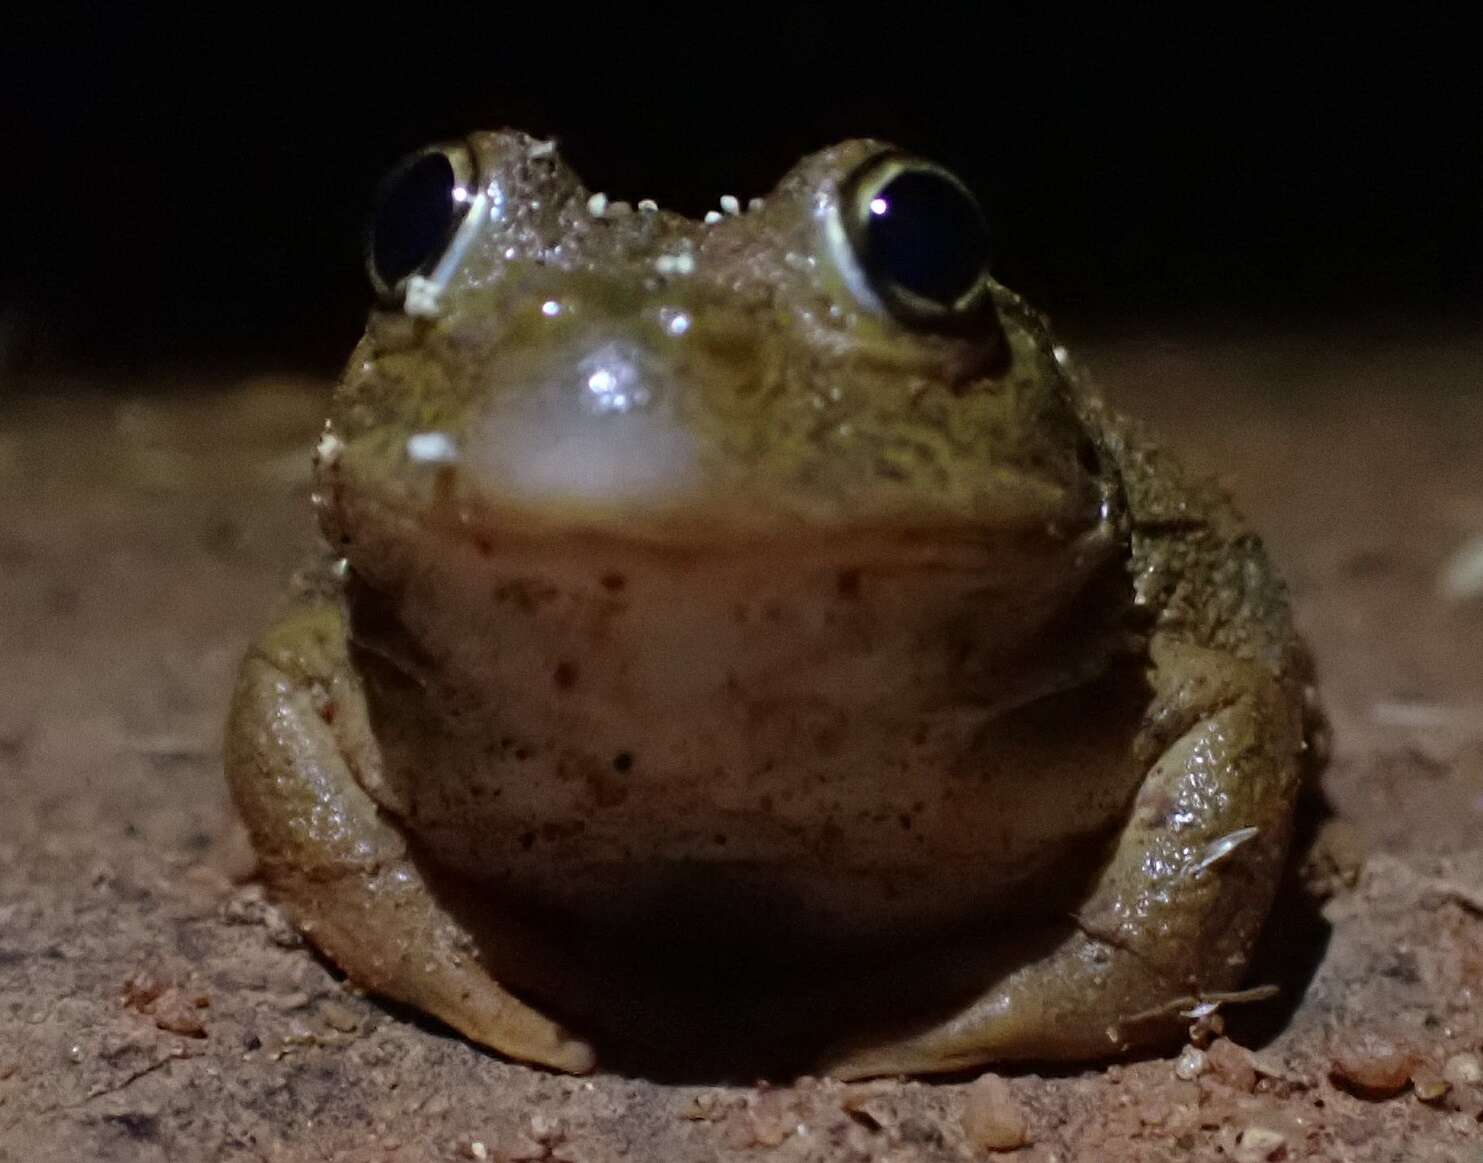 Image of Main's Frog